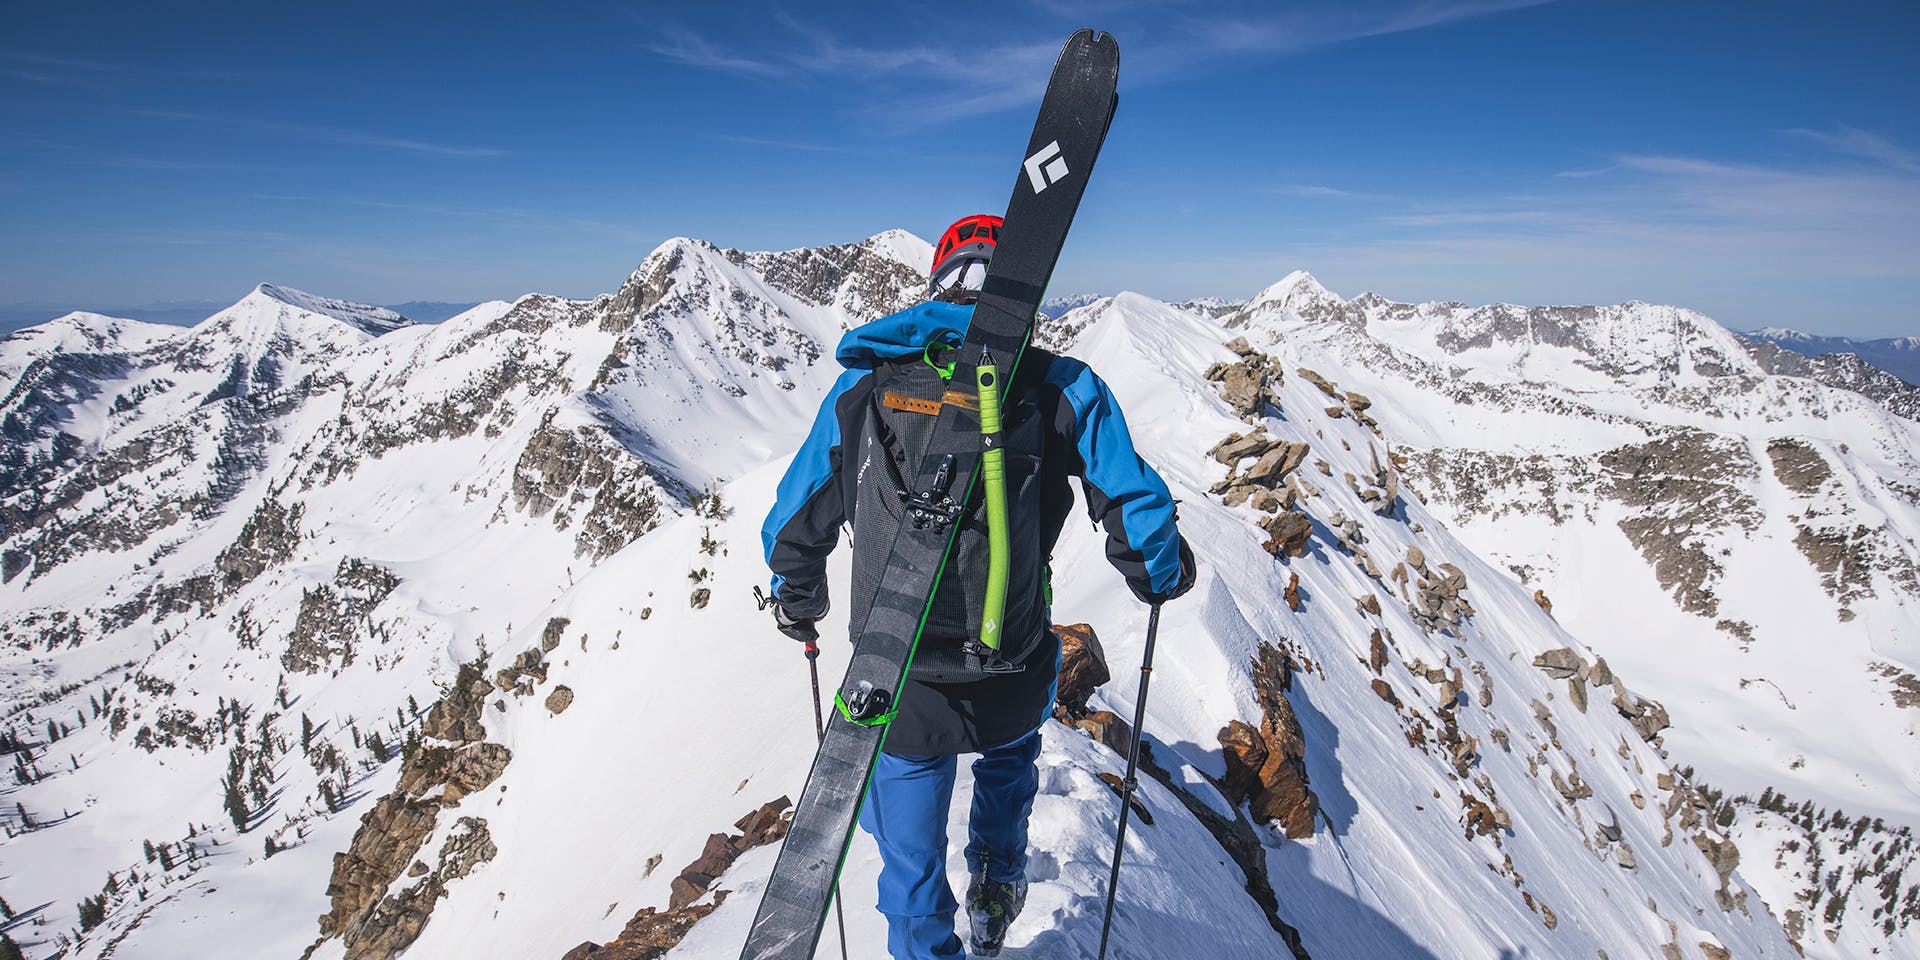 A photo of back country skiing in the wasatch